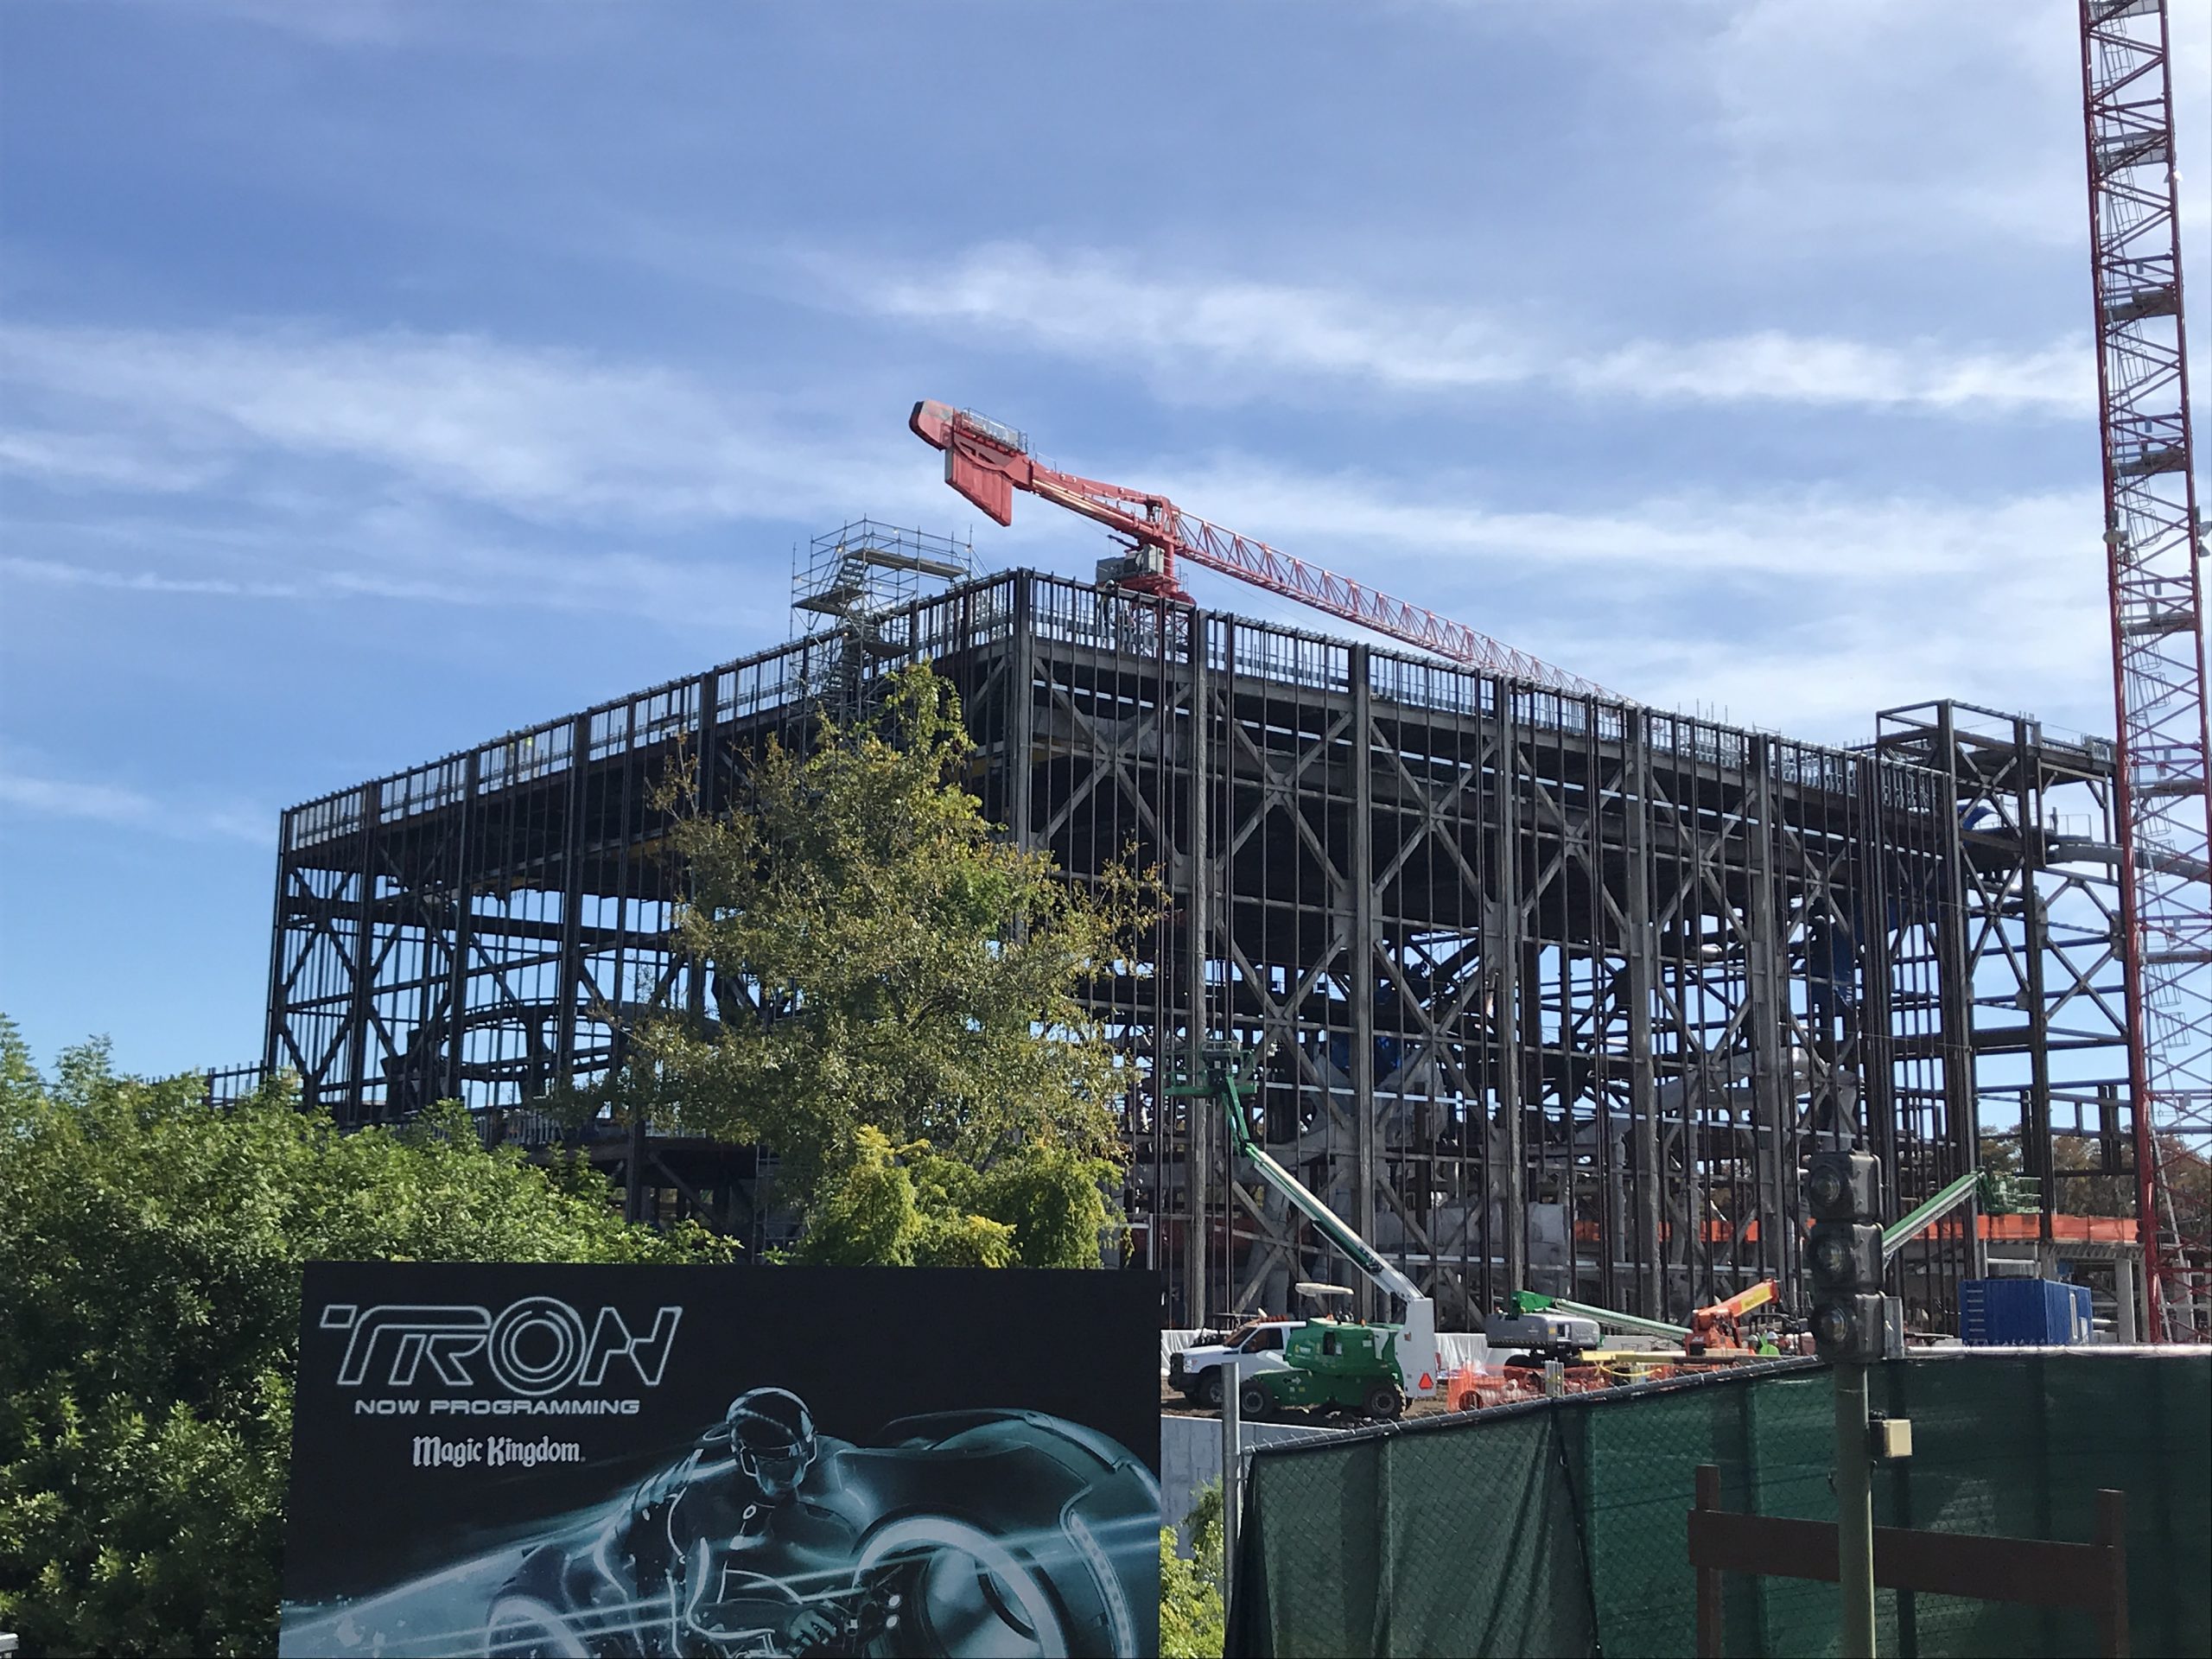 PHOTOS: Retaining Walls Installed Along Launch at TRON Lightcycle Run in the Magic Kingdom